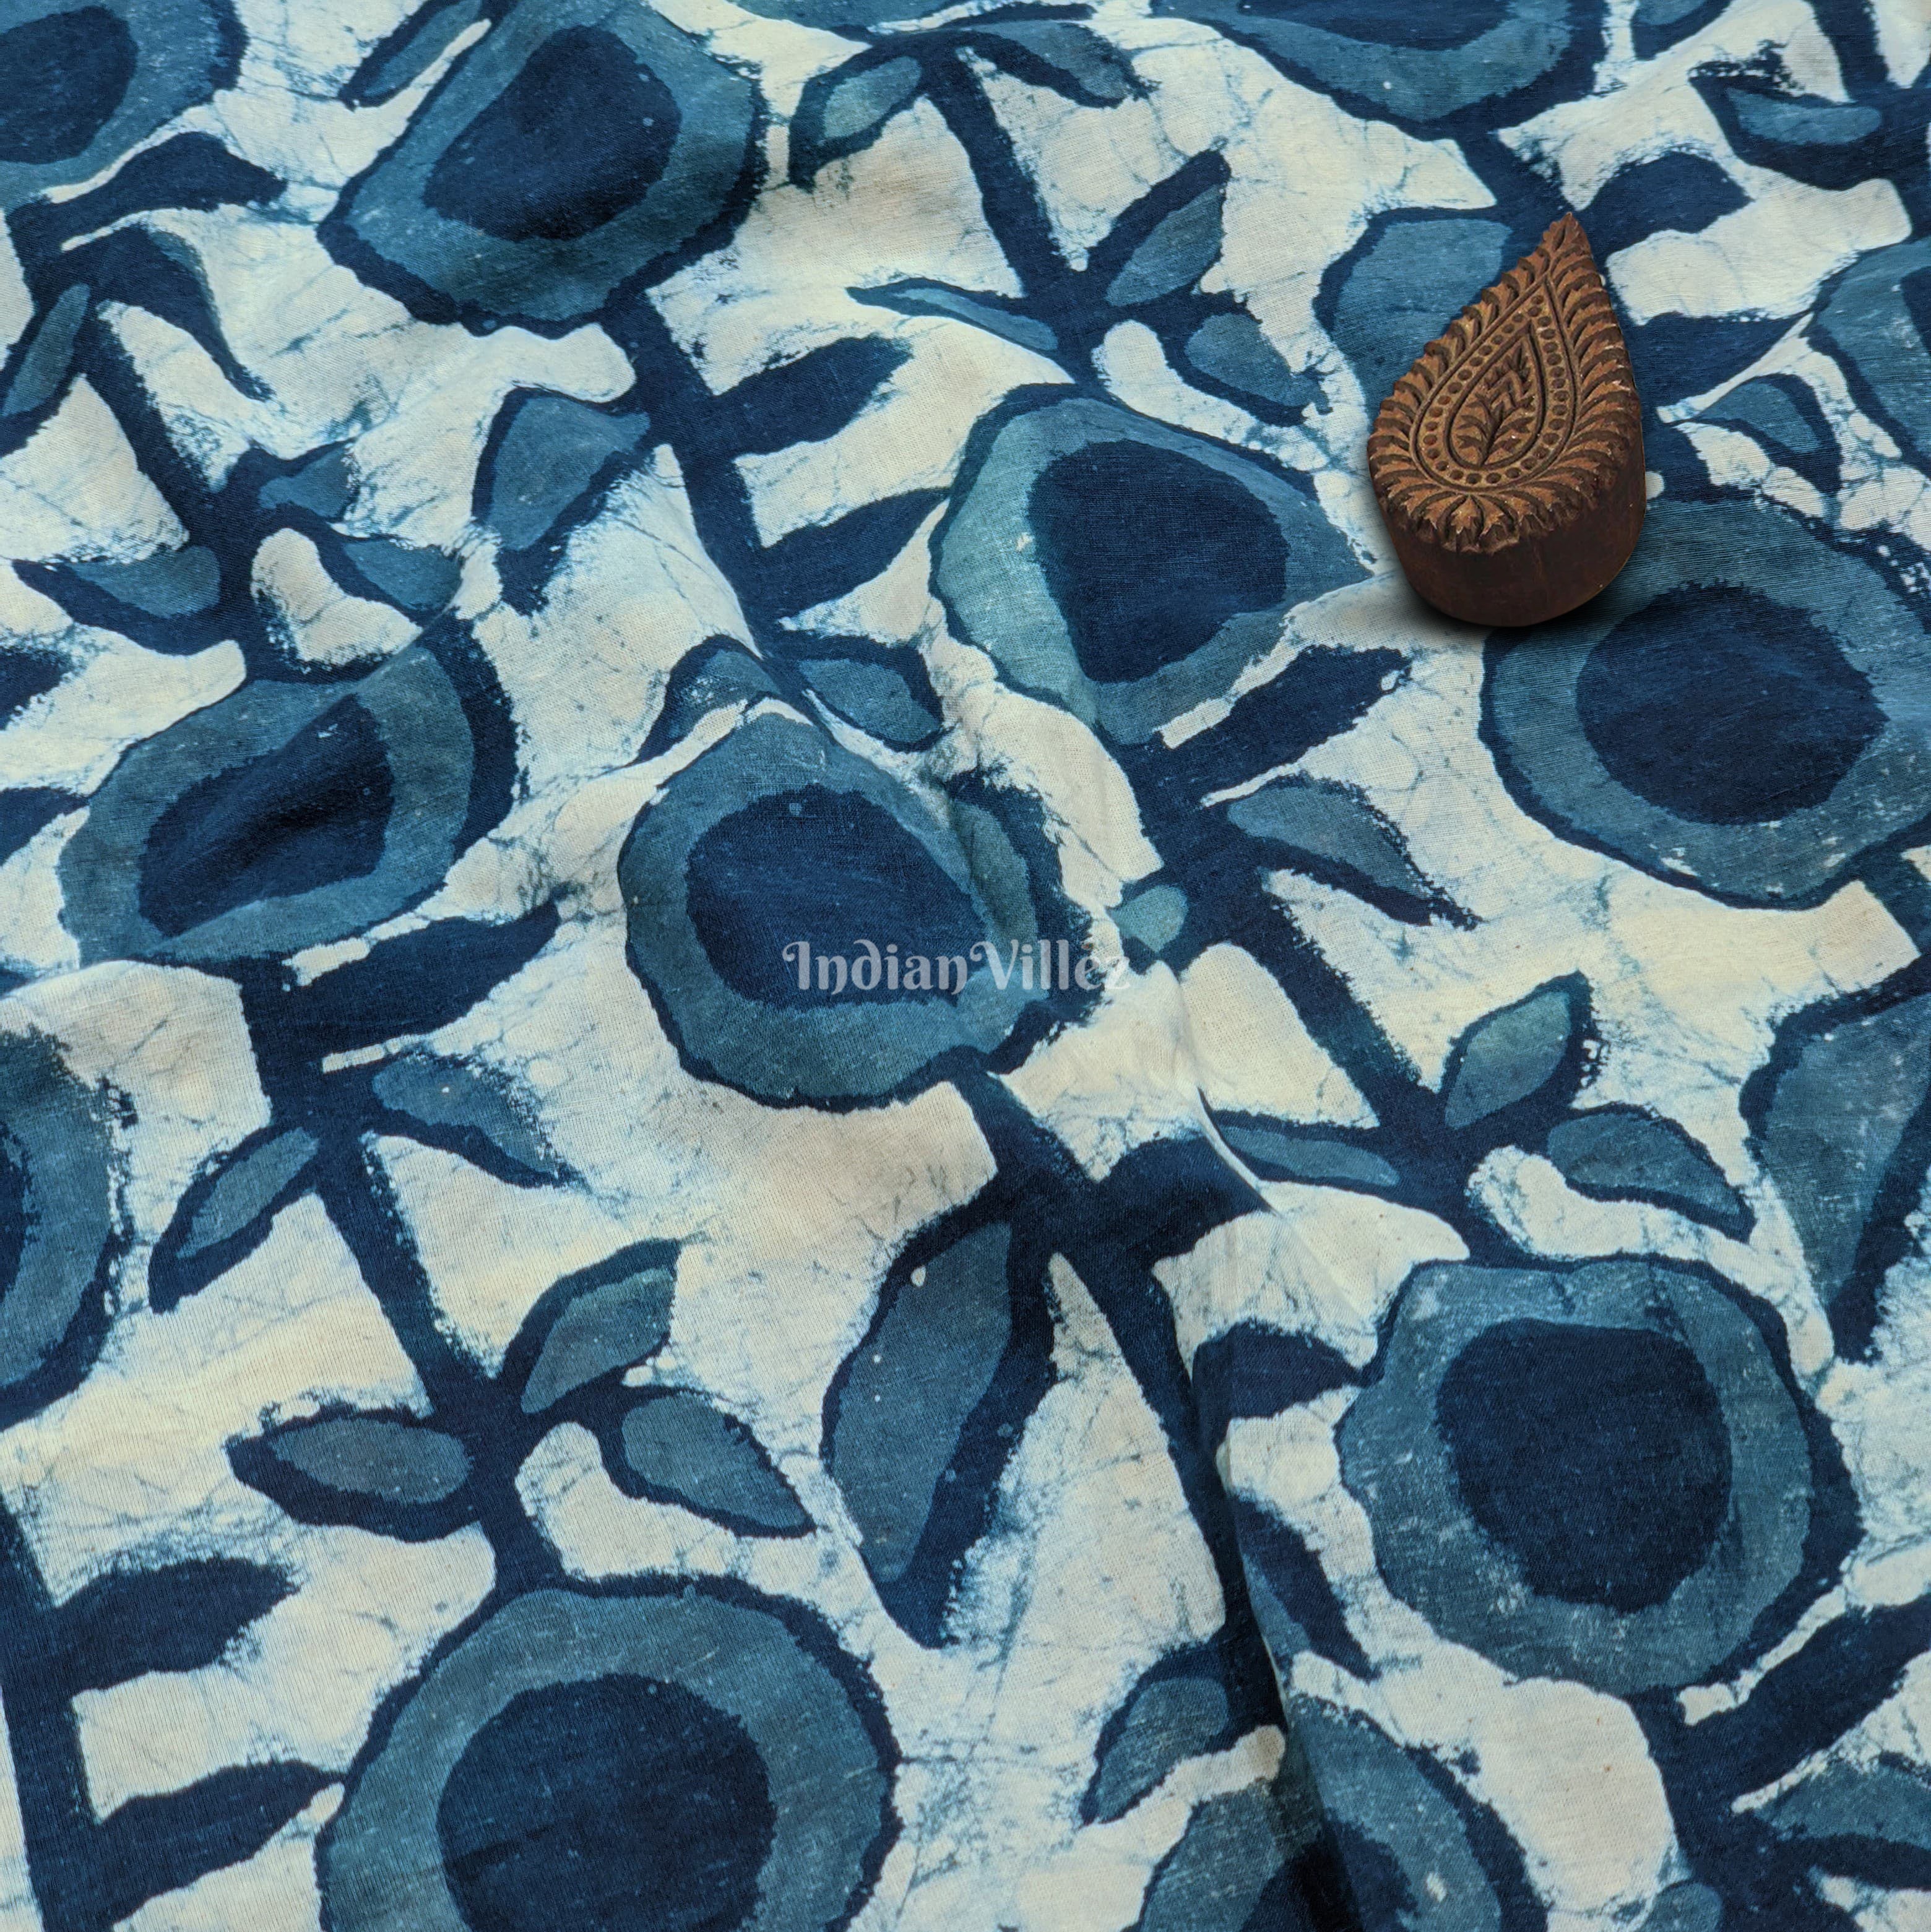 White Blue Floral Hand Block Printed Cotton Fabric